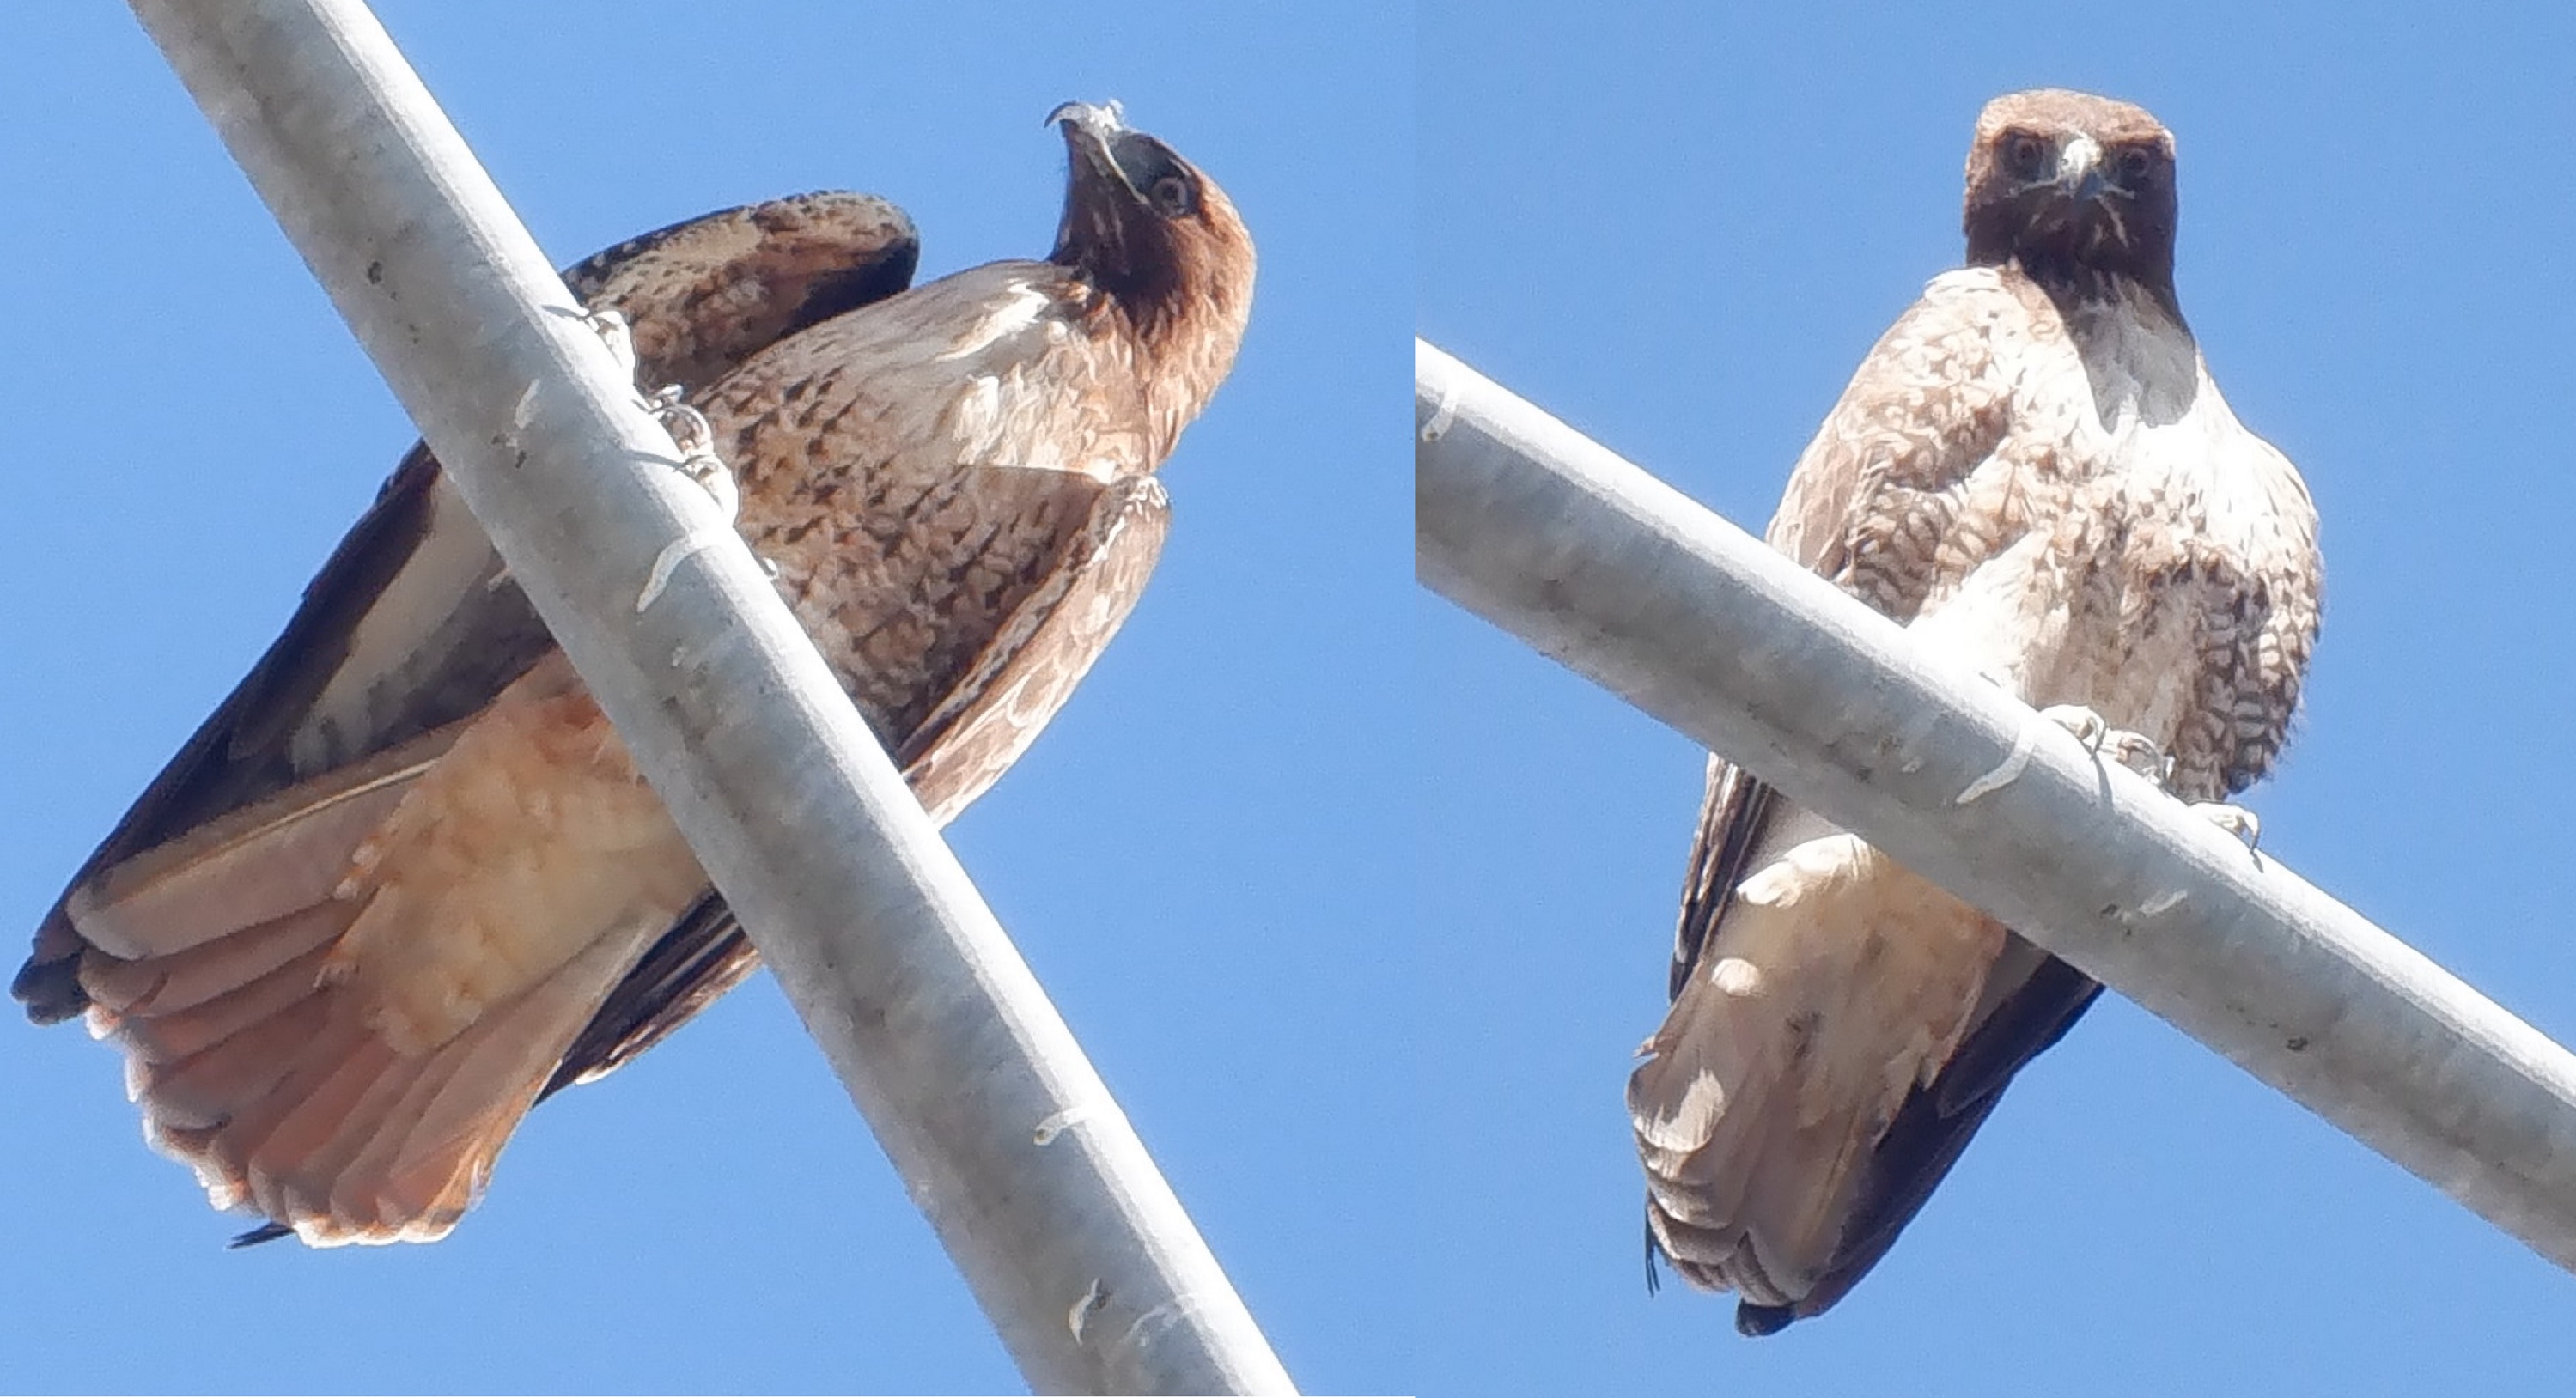 Photos I took of a hawk put together on Microsoft Paint